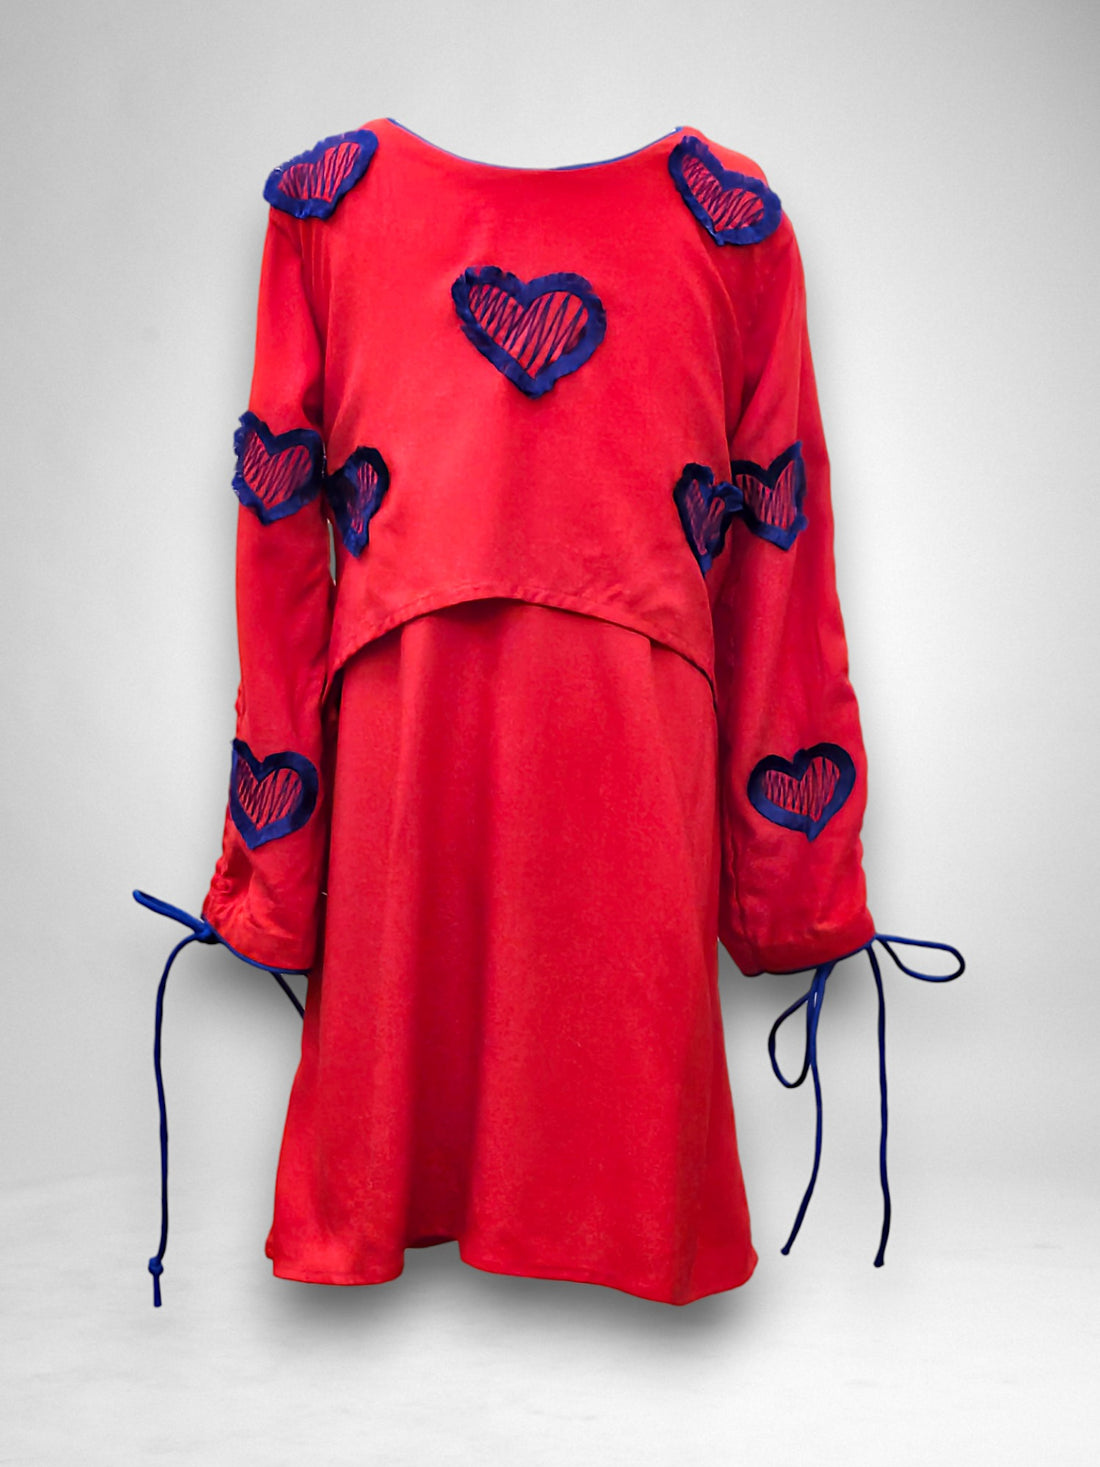 Red Two-Layer Dress with Intricate Blue Threadwork Hearts